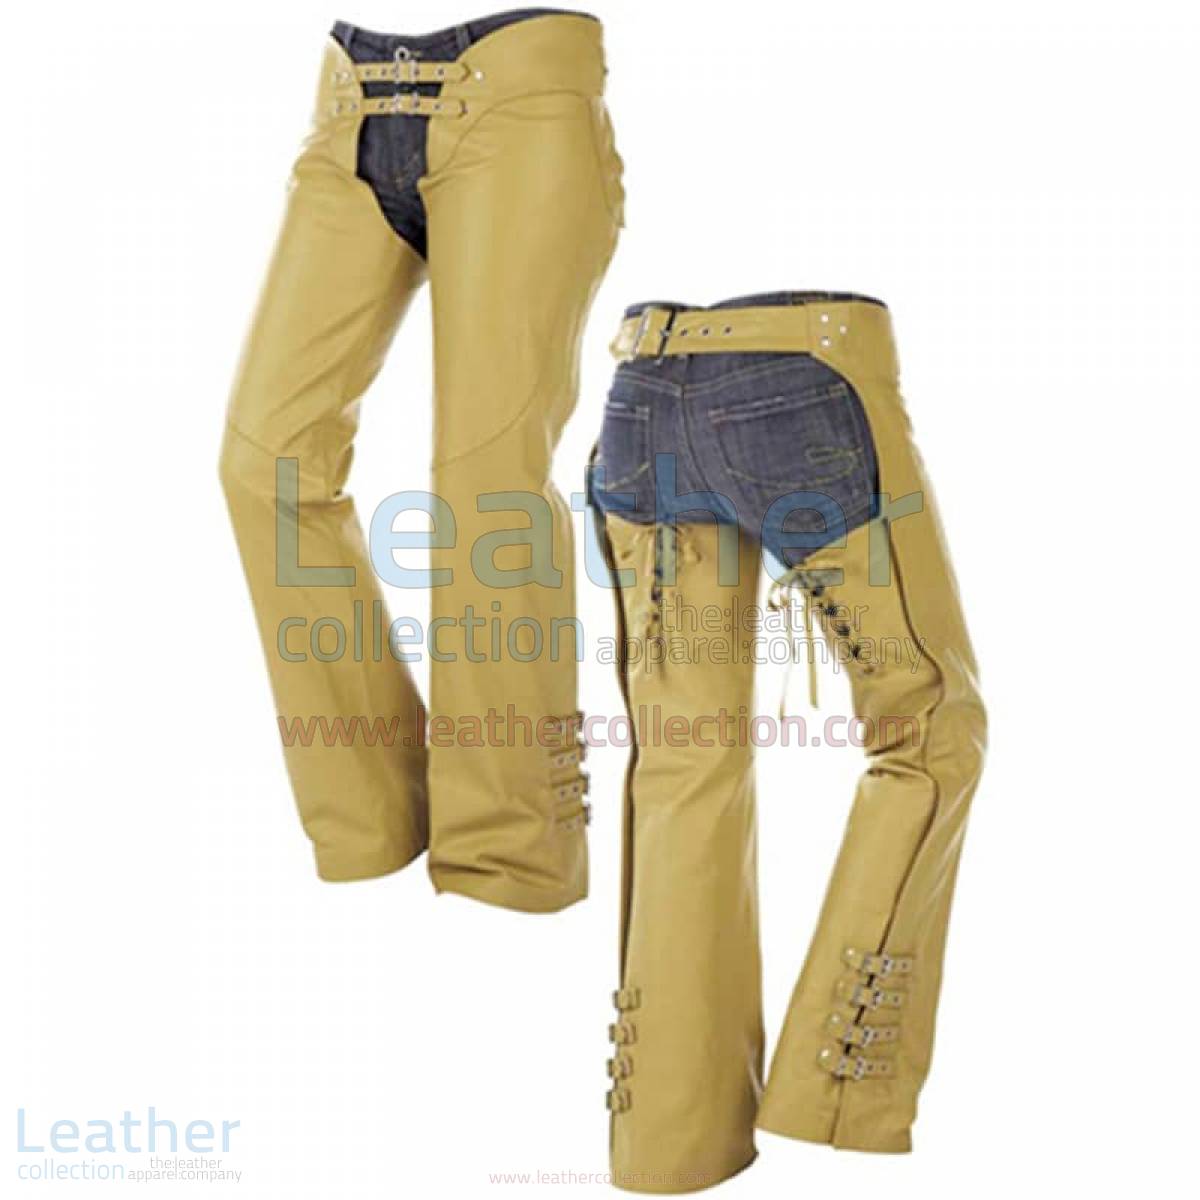 Buckles on Legs Leather Cowboy Chaps